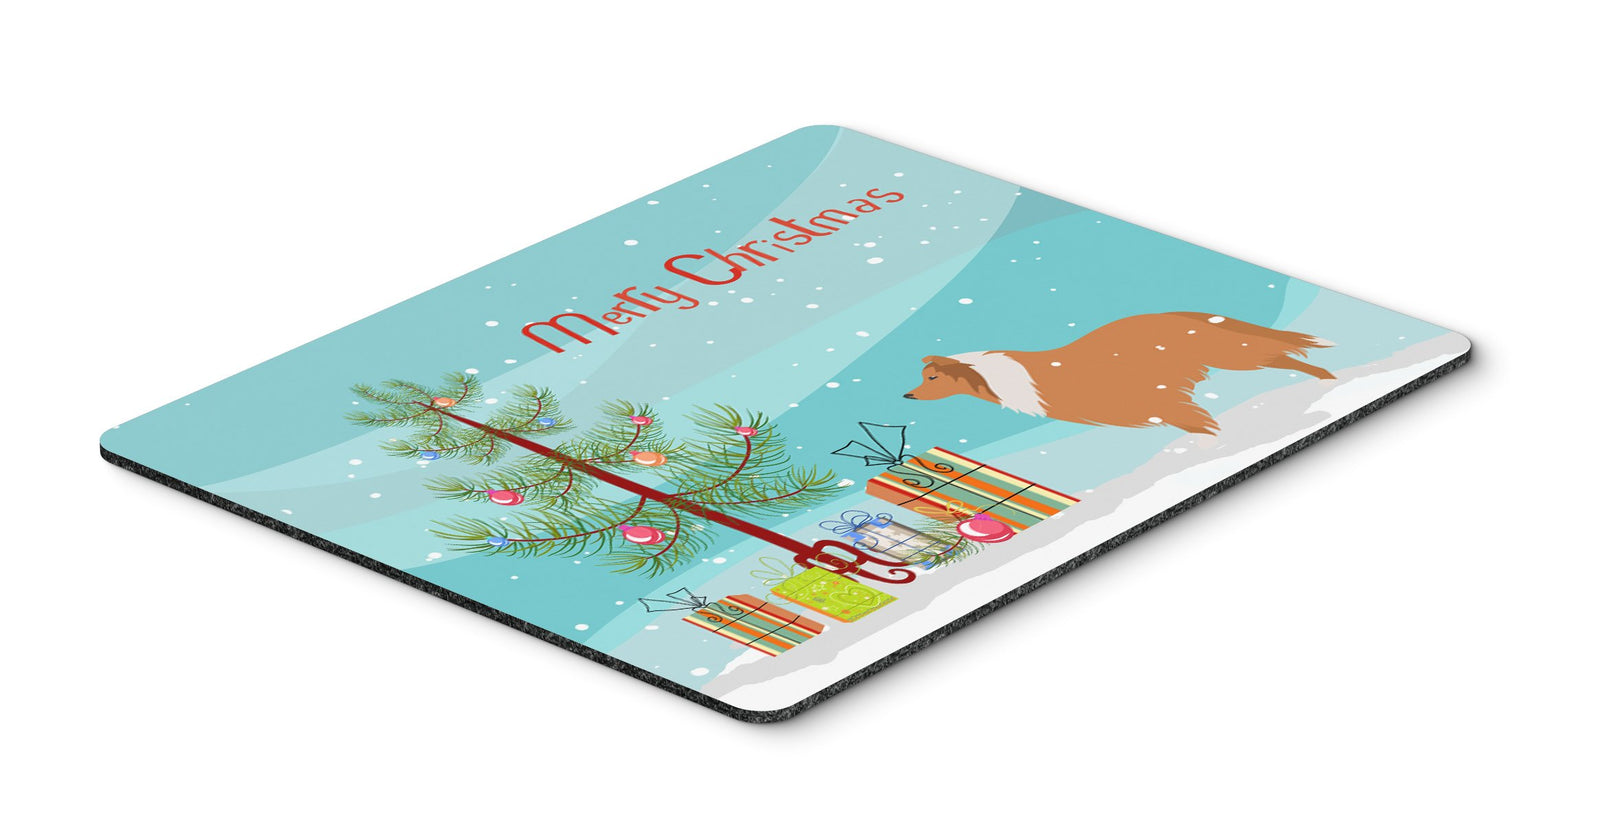 Collie Dog Merry Christmas Tree Mouse Pad, Hot Pad or Trivet by Caroline's Treasures